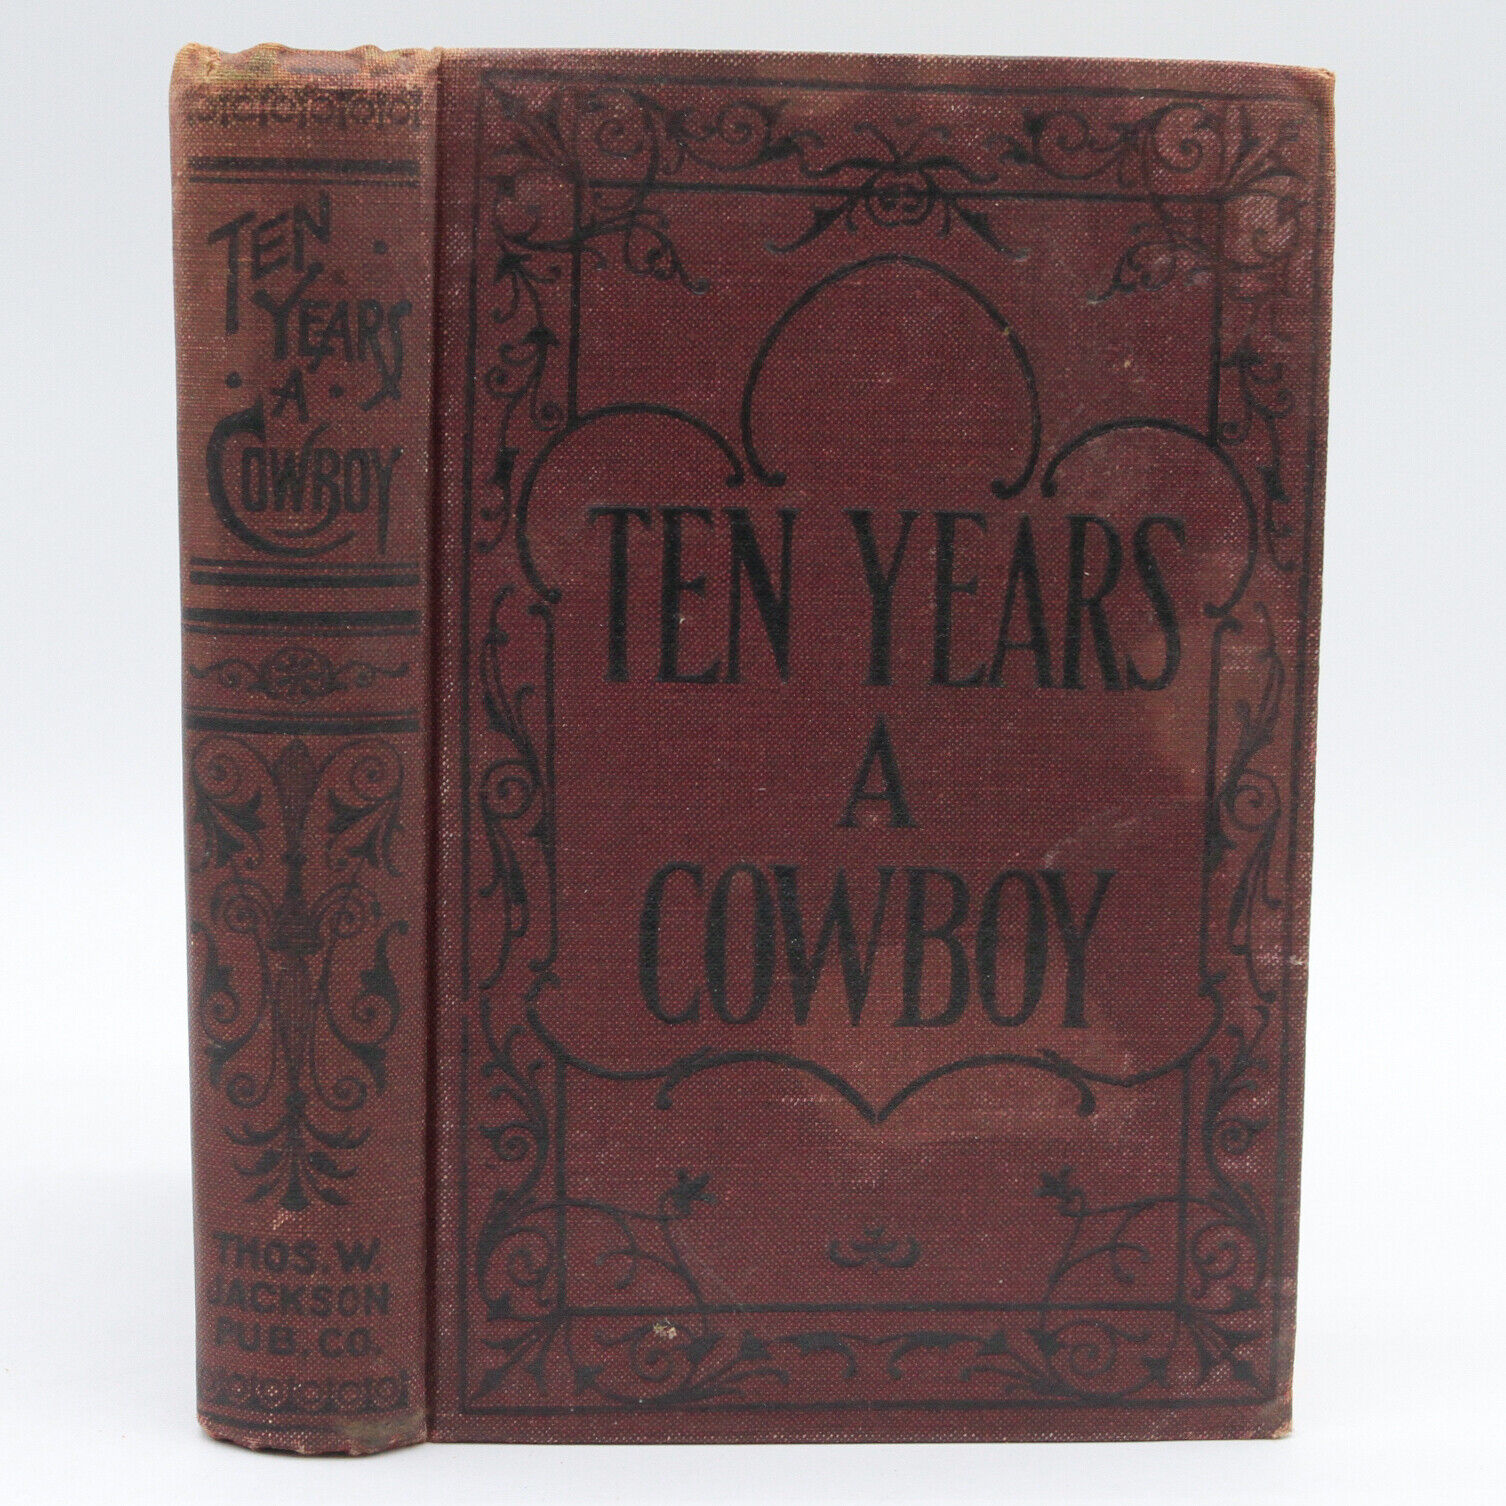 1898 TEN YEARS A COWBOY wild west RANCHING hunting INDIAN WARS western ANTIQUE